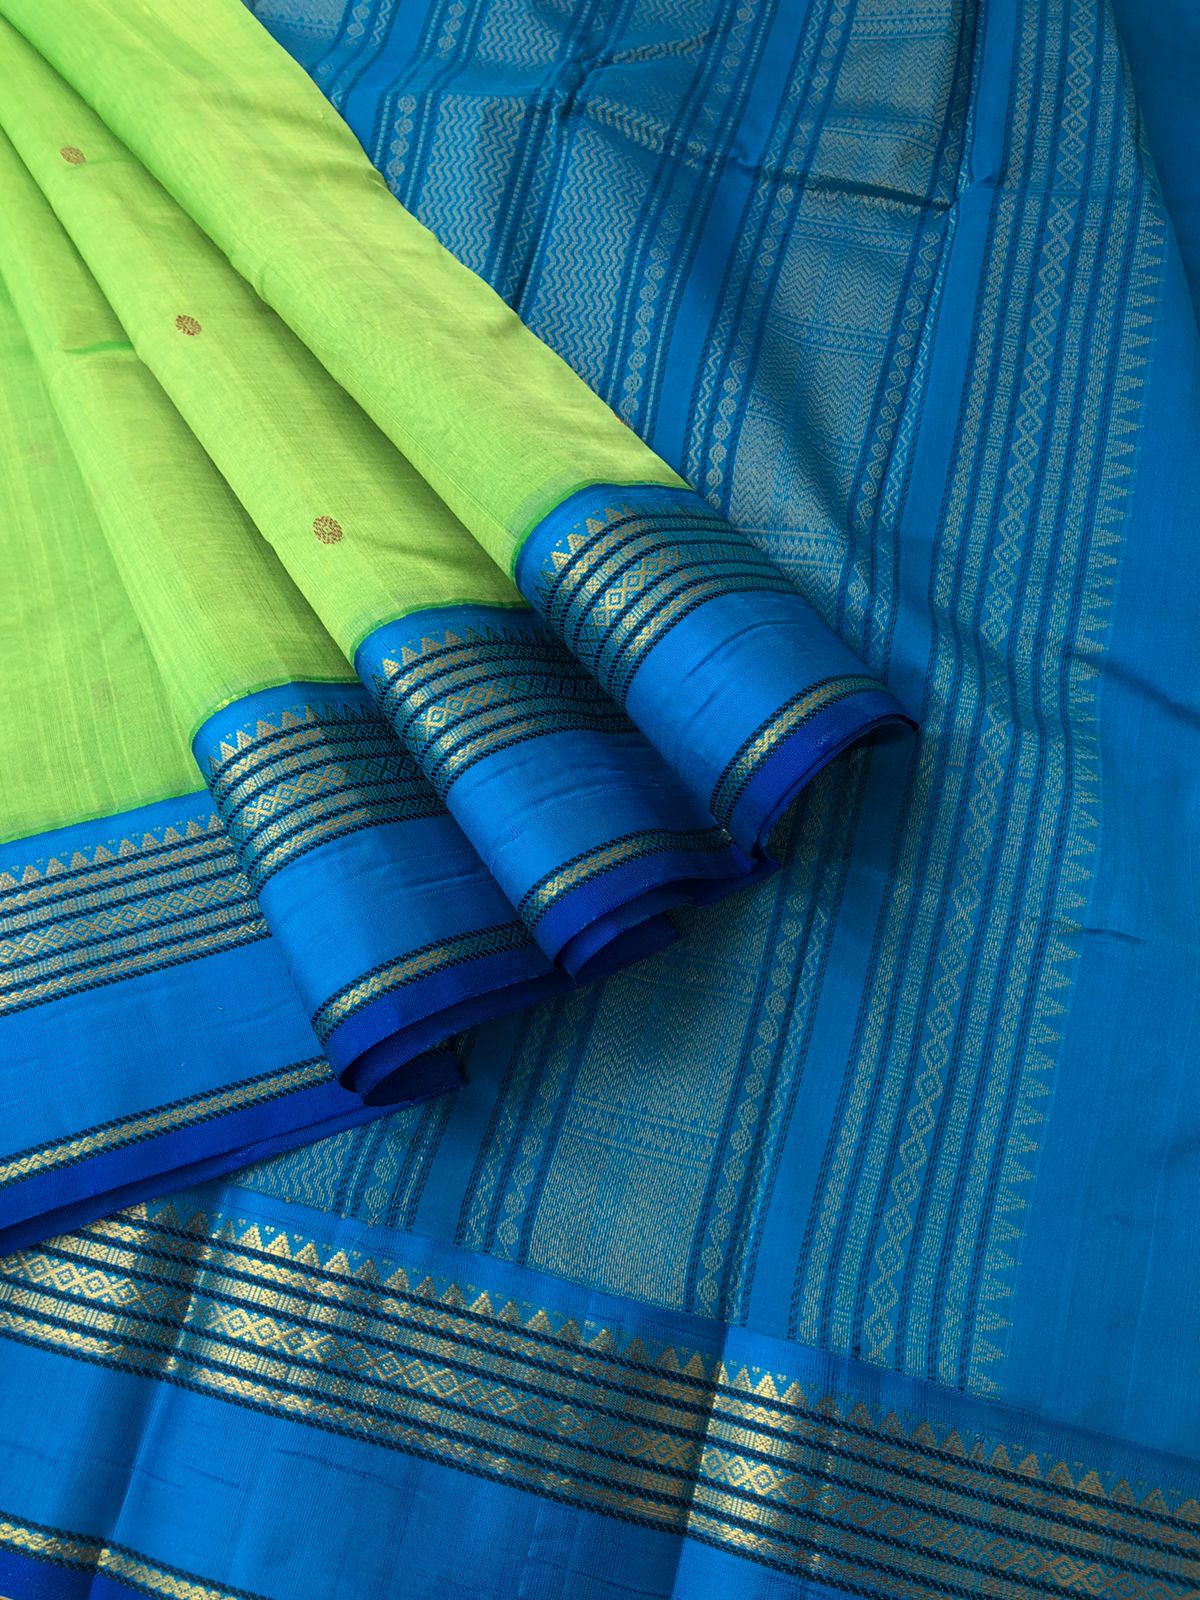 Korvai Silk Cotton with Pure Silk Woven Borders - fresh apple green and blue